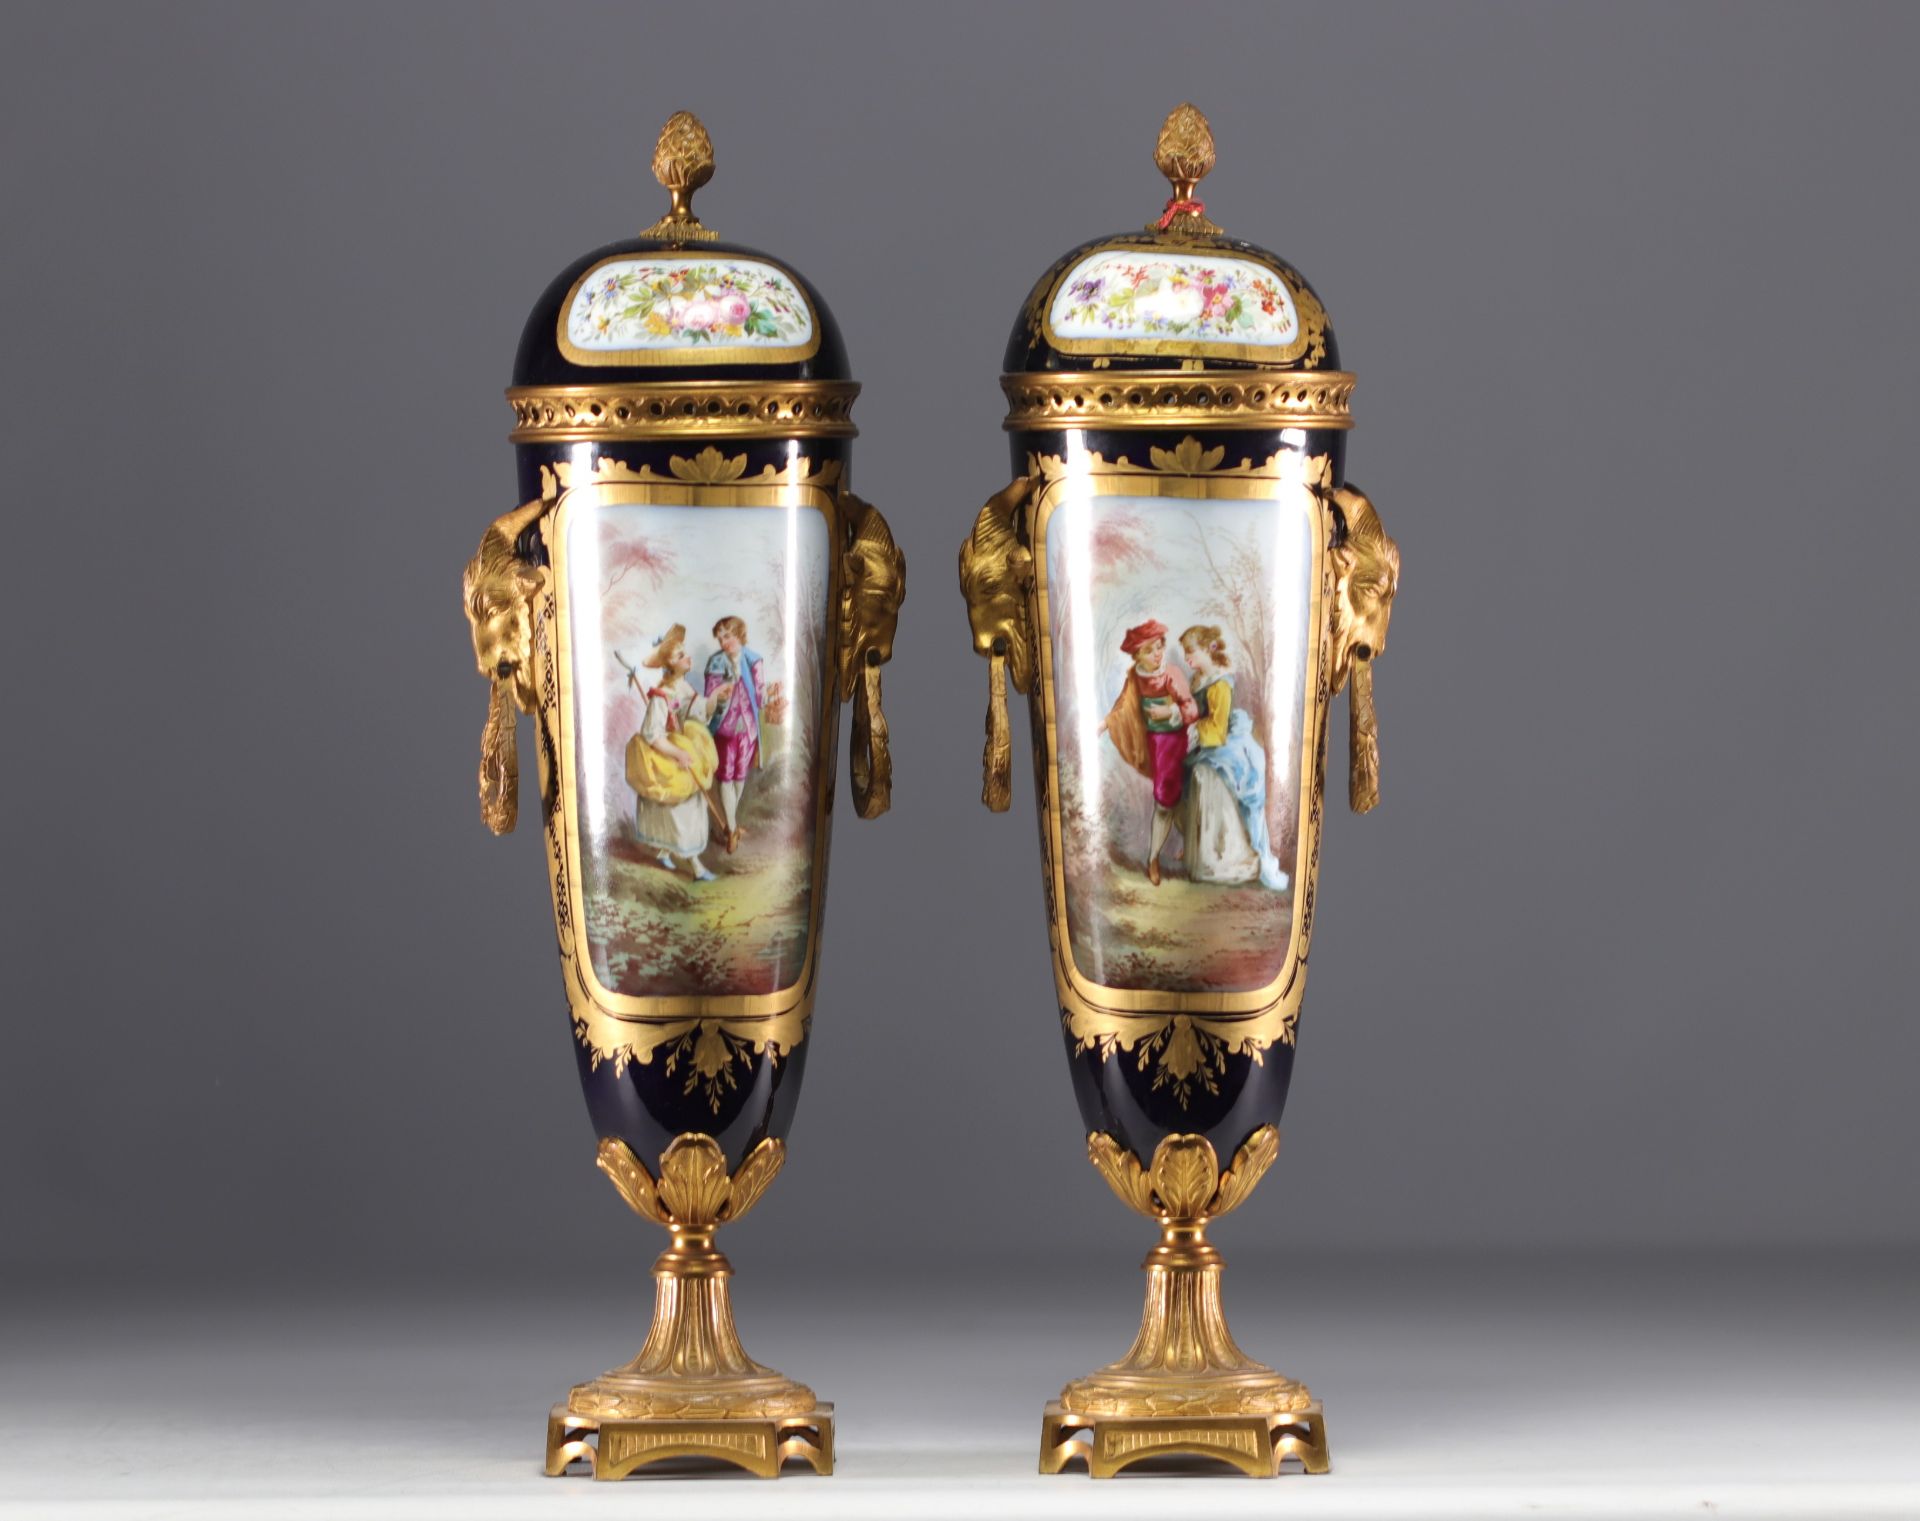 Sevres - Pair of bronze mounted porcelain covered cassolettes "Romantic scenes".